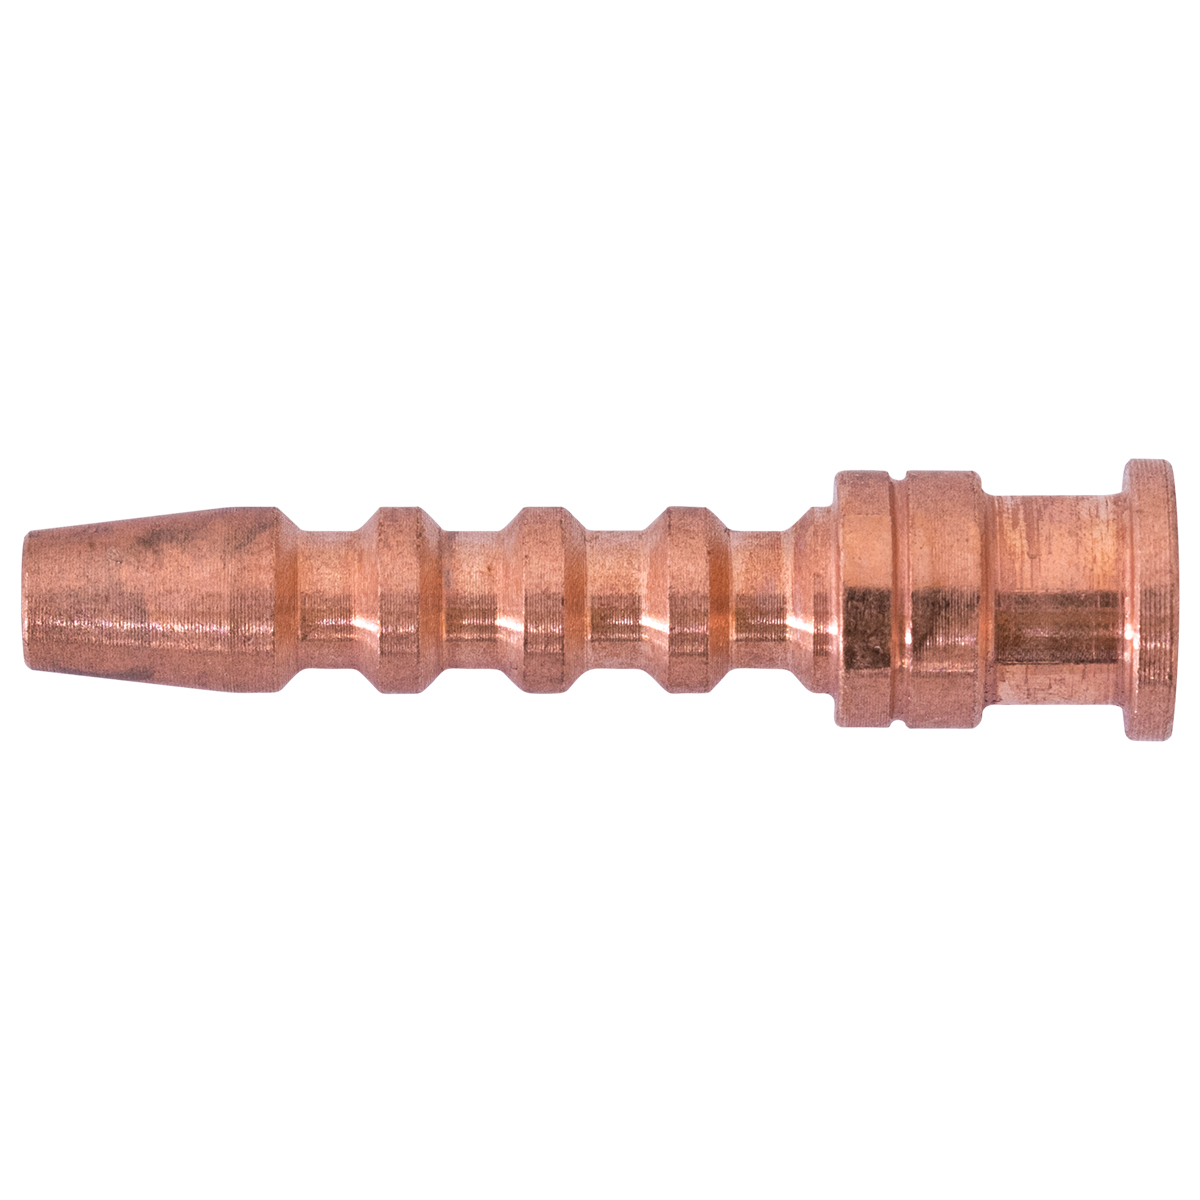 Welding tip for acetylene made of copper, size 3 bore 0,60 mm